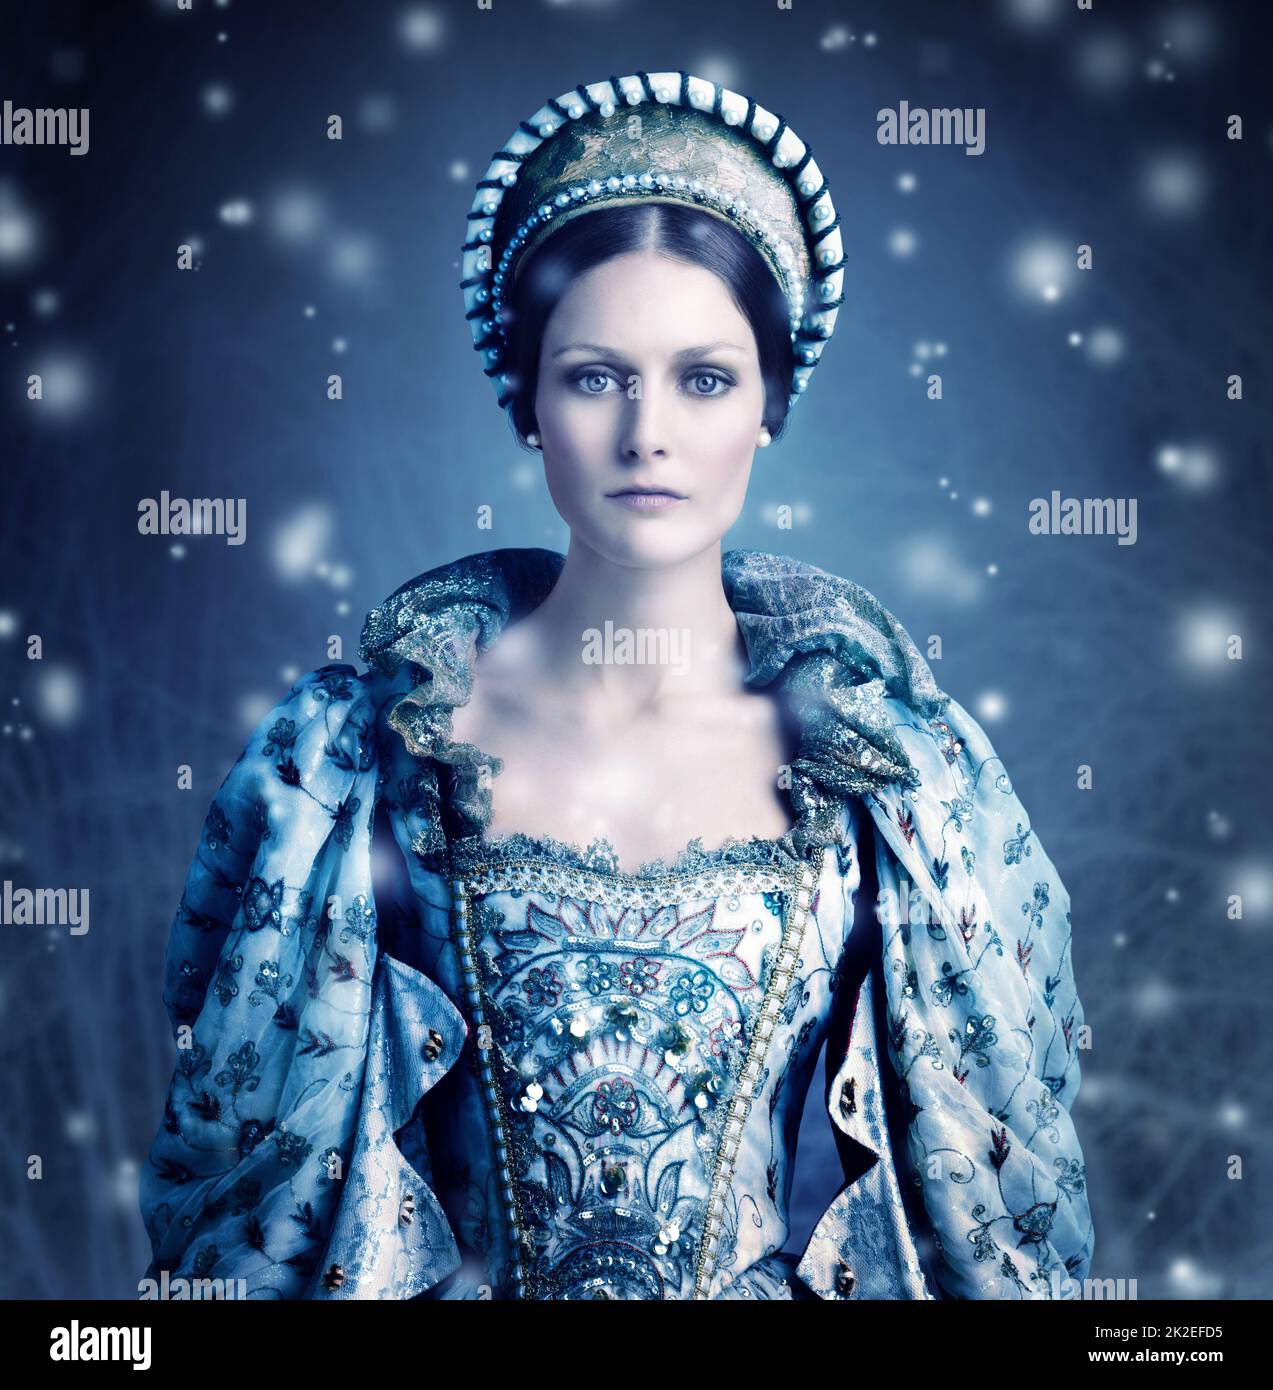 Here comes winter. Portrait of a evil-looking queen with snow falling around her. Stock Photo